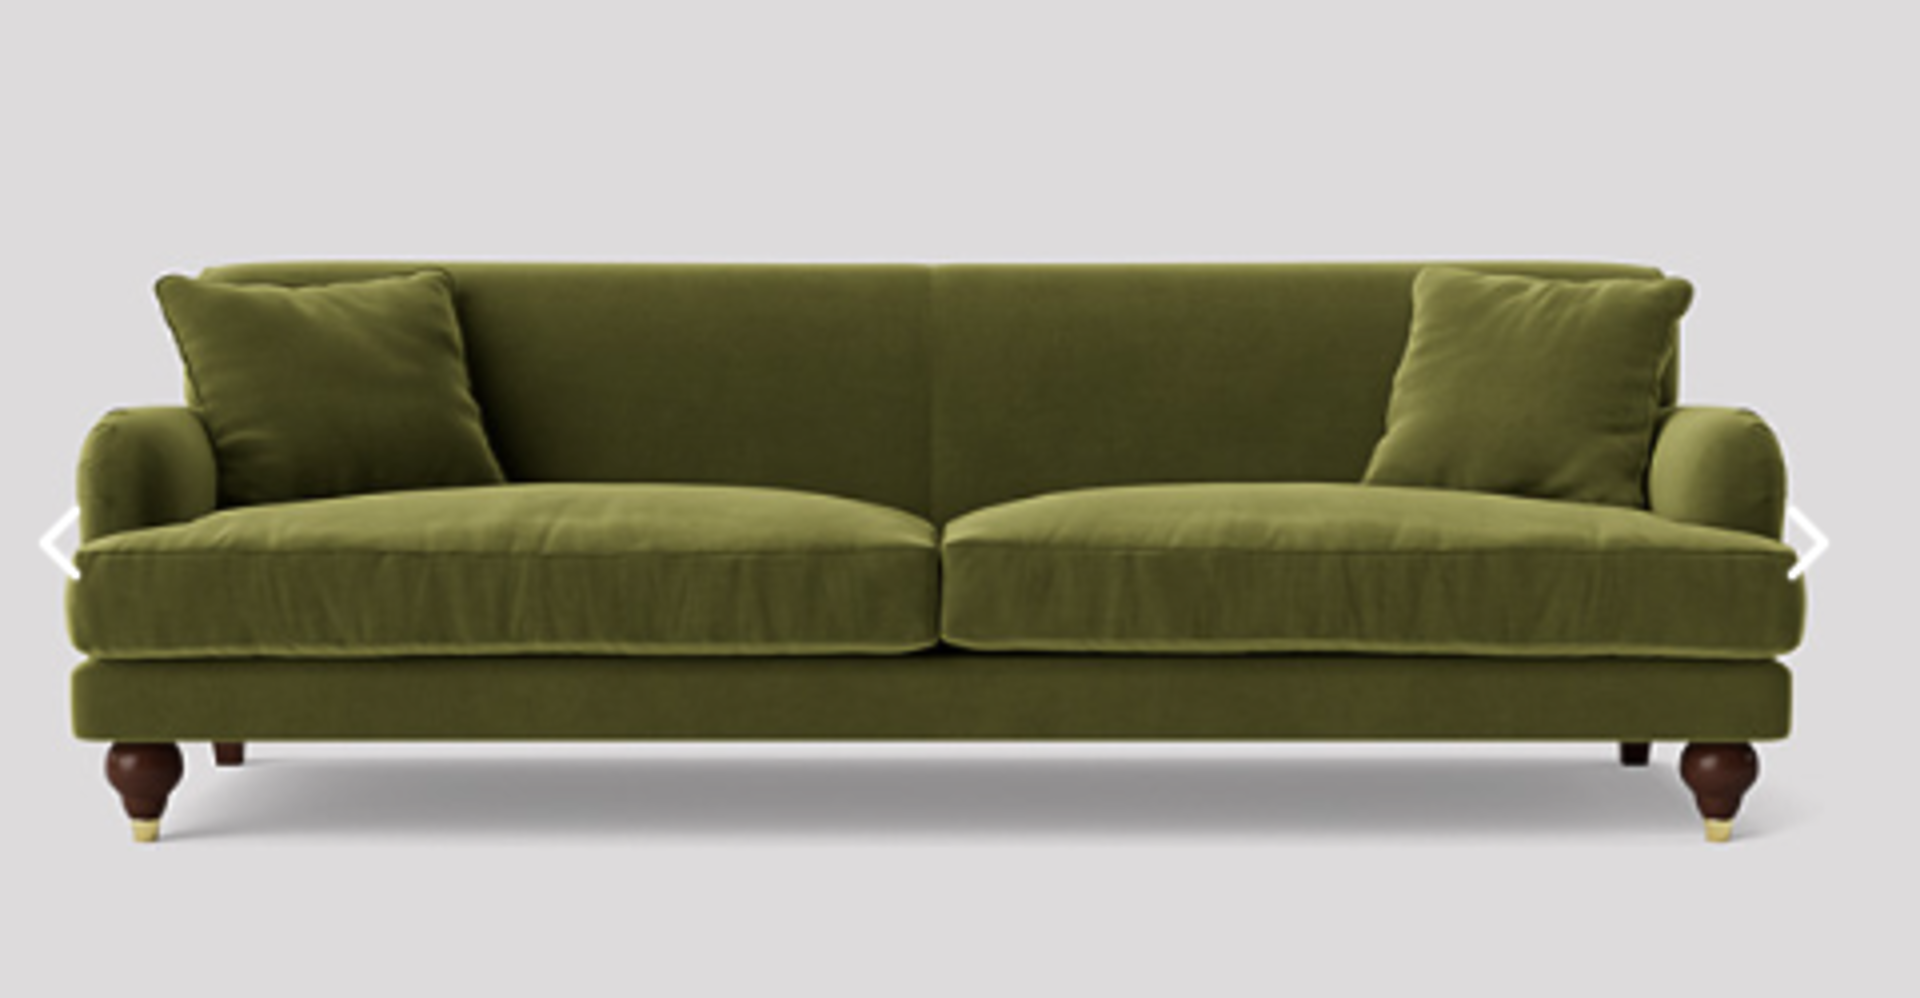 Swoon Chorley MTO Three-Seater Sofa in Fern EasyVelvet RRP ?1699. bottom frame damage and material